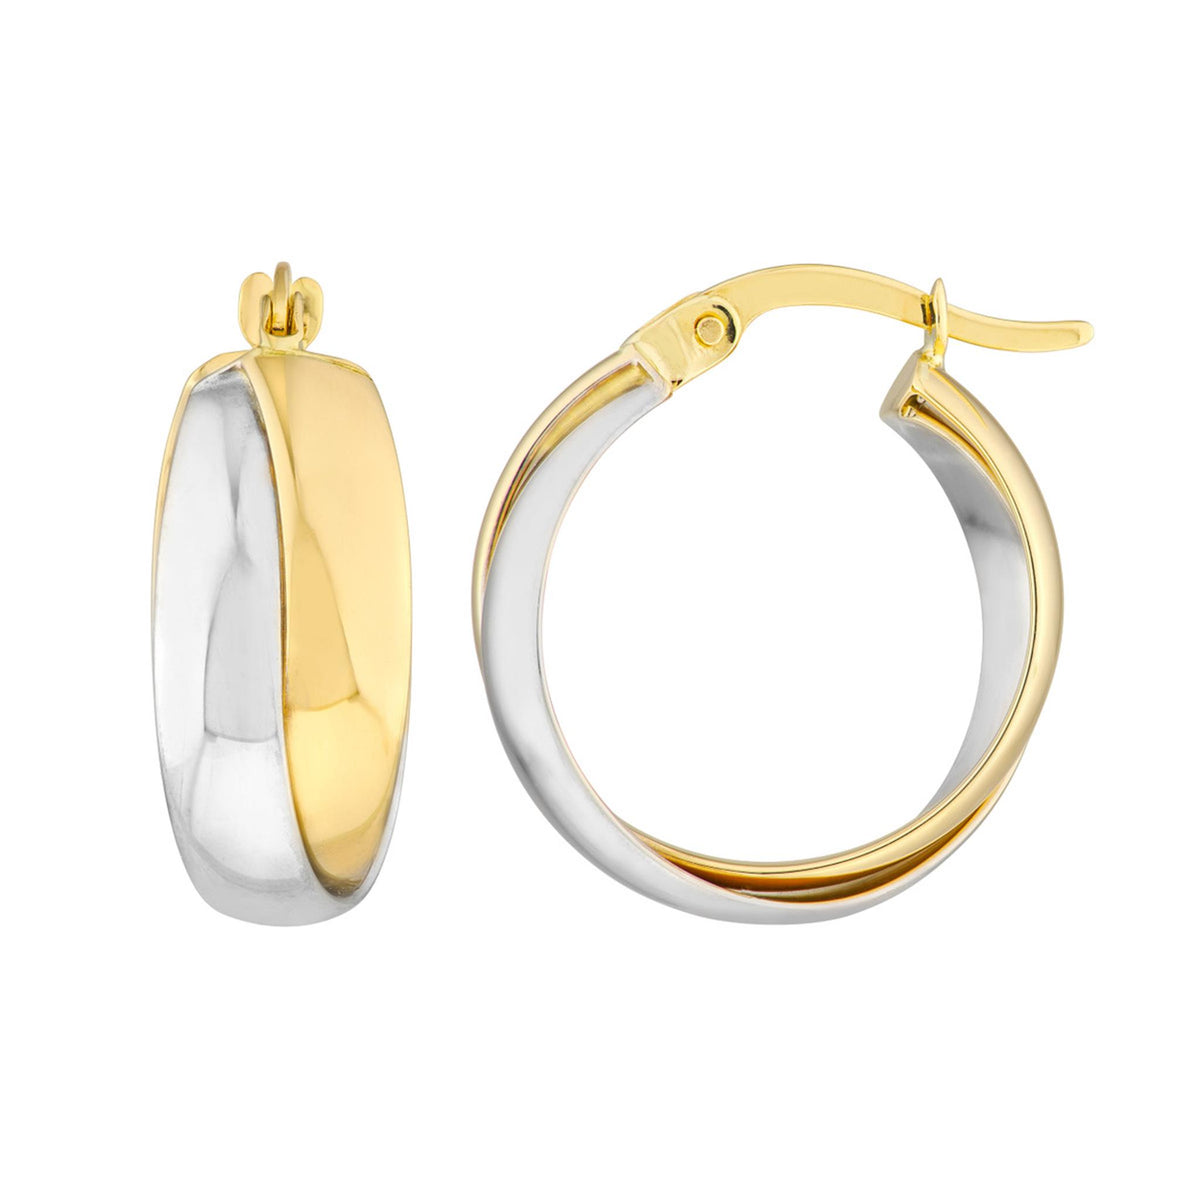 14Kt Yellow & White Gold 15mm Round Hoop Earrings